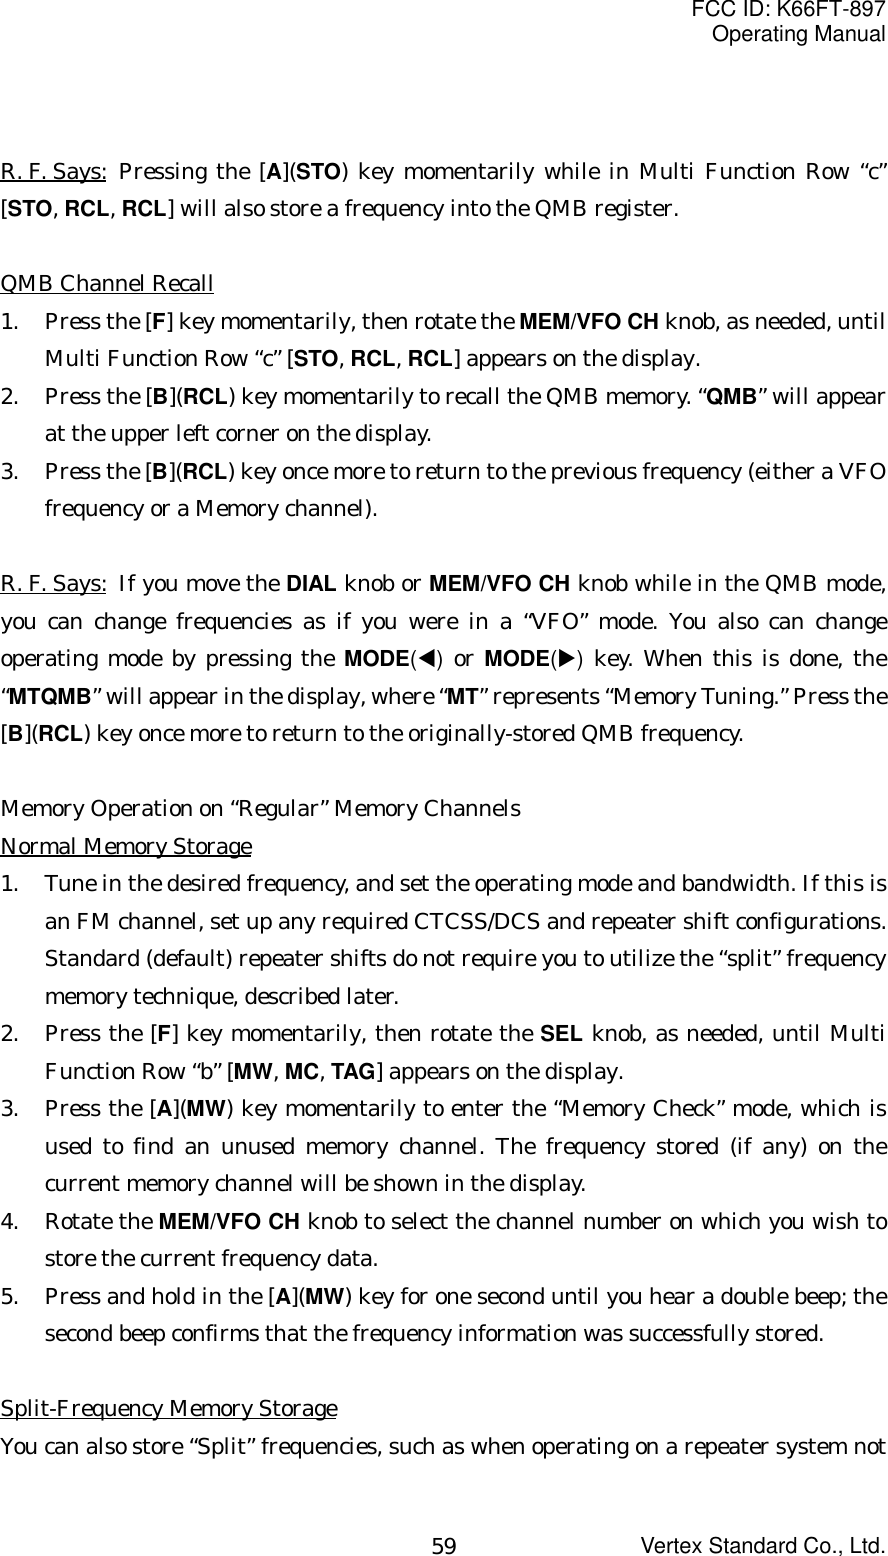 FCC ID: K66FT-897Operating ManualVertex Standard Co., Ltd.59R. F. Says: Pressing the [A](STO) key momentarily while in Multi Function Row “c”[STO, RCL, RCL] will also store a frequency into the QMB register.QMB Channel Recall1. Press the [F] key momentarily, then rotate the MEM/VFO CH knob, as needed, untilMulti Function Row “c” [STO, RCL, RCL] appears on the display.2. Press the [B](RCL) key momentarily to recall the QMB memory. “QMB” will appearat the upper left corner on the display.3. Press the [B](RCL) key once more to return to the previous frequency (either a VFOfrequency or a Memory channel).R. F. Says:  If you move the DIAL knob or MEM/VFO CH knob while in the QMB mode,you can change frequencies as if you were in a “VFO” mode. You also can changeoperating mode by pressing the MODE(W) or MODE(X) key. When this is done, the“MTQMB” will appear in the display, where “MT” represents “Memory Tuning.” Press the[B](RCL) key once more to return to the originally-stored QMB frequency.Memory Operation on “Regular” Memory ChannelsNormal Memory Storage1. Tune in the desired frequency, and set the operating mode and bandwidth. If this isan FM channel, set up any required CTCSS/DCS and repeater shift configurations.Standard (default) repeater shifts do not require you to utilize the “split” frequencymemory technique, described later.2. Press the [F] key momentarily, then rotate the SEL knob, as needed, until MultiFunction Row “b” [MW, MC, TAG] appears on the display.3. Press the [A](MW) key momentarily to enter the “Memory Check” mode, which isused to find an unused memory channel. The frequency stored (if any) on thecurrent memory channel will be shown in the display.4. Rotate the MEM/VFO CH knob to select the channel number on which you wish tostore the current frequency data.5. Press and hold in the [A](MW) key for one second until you hear a double beep; thesecond beep confirms that the frequency information was successfully stored.Split-Frequency Memory StorageYou can also store “Split” frequencies, such as when operating on a repeater system not